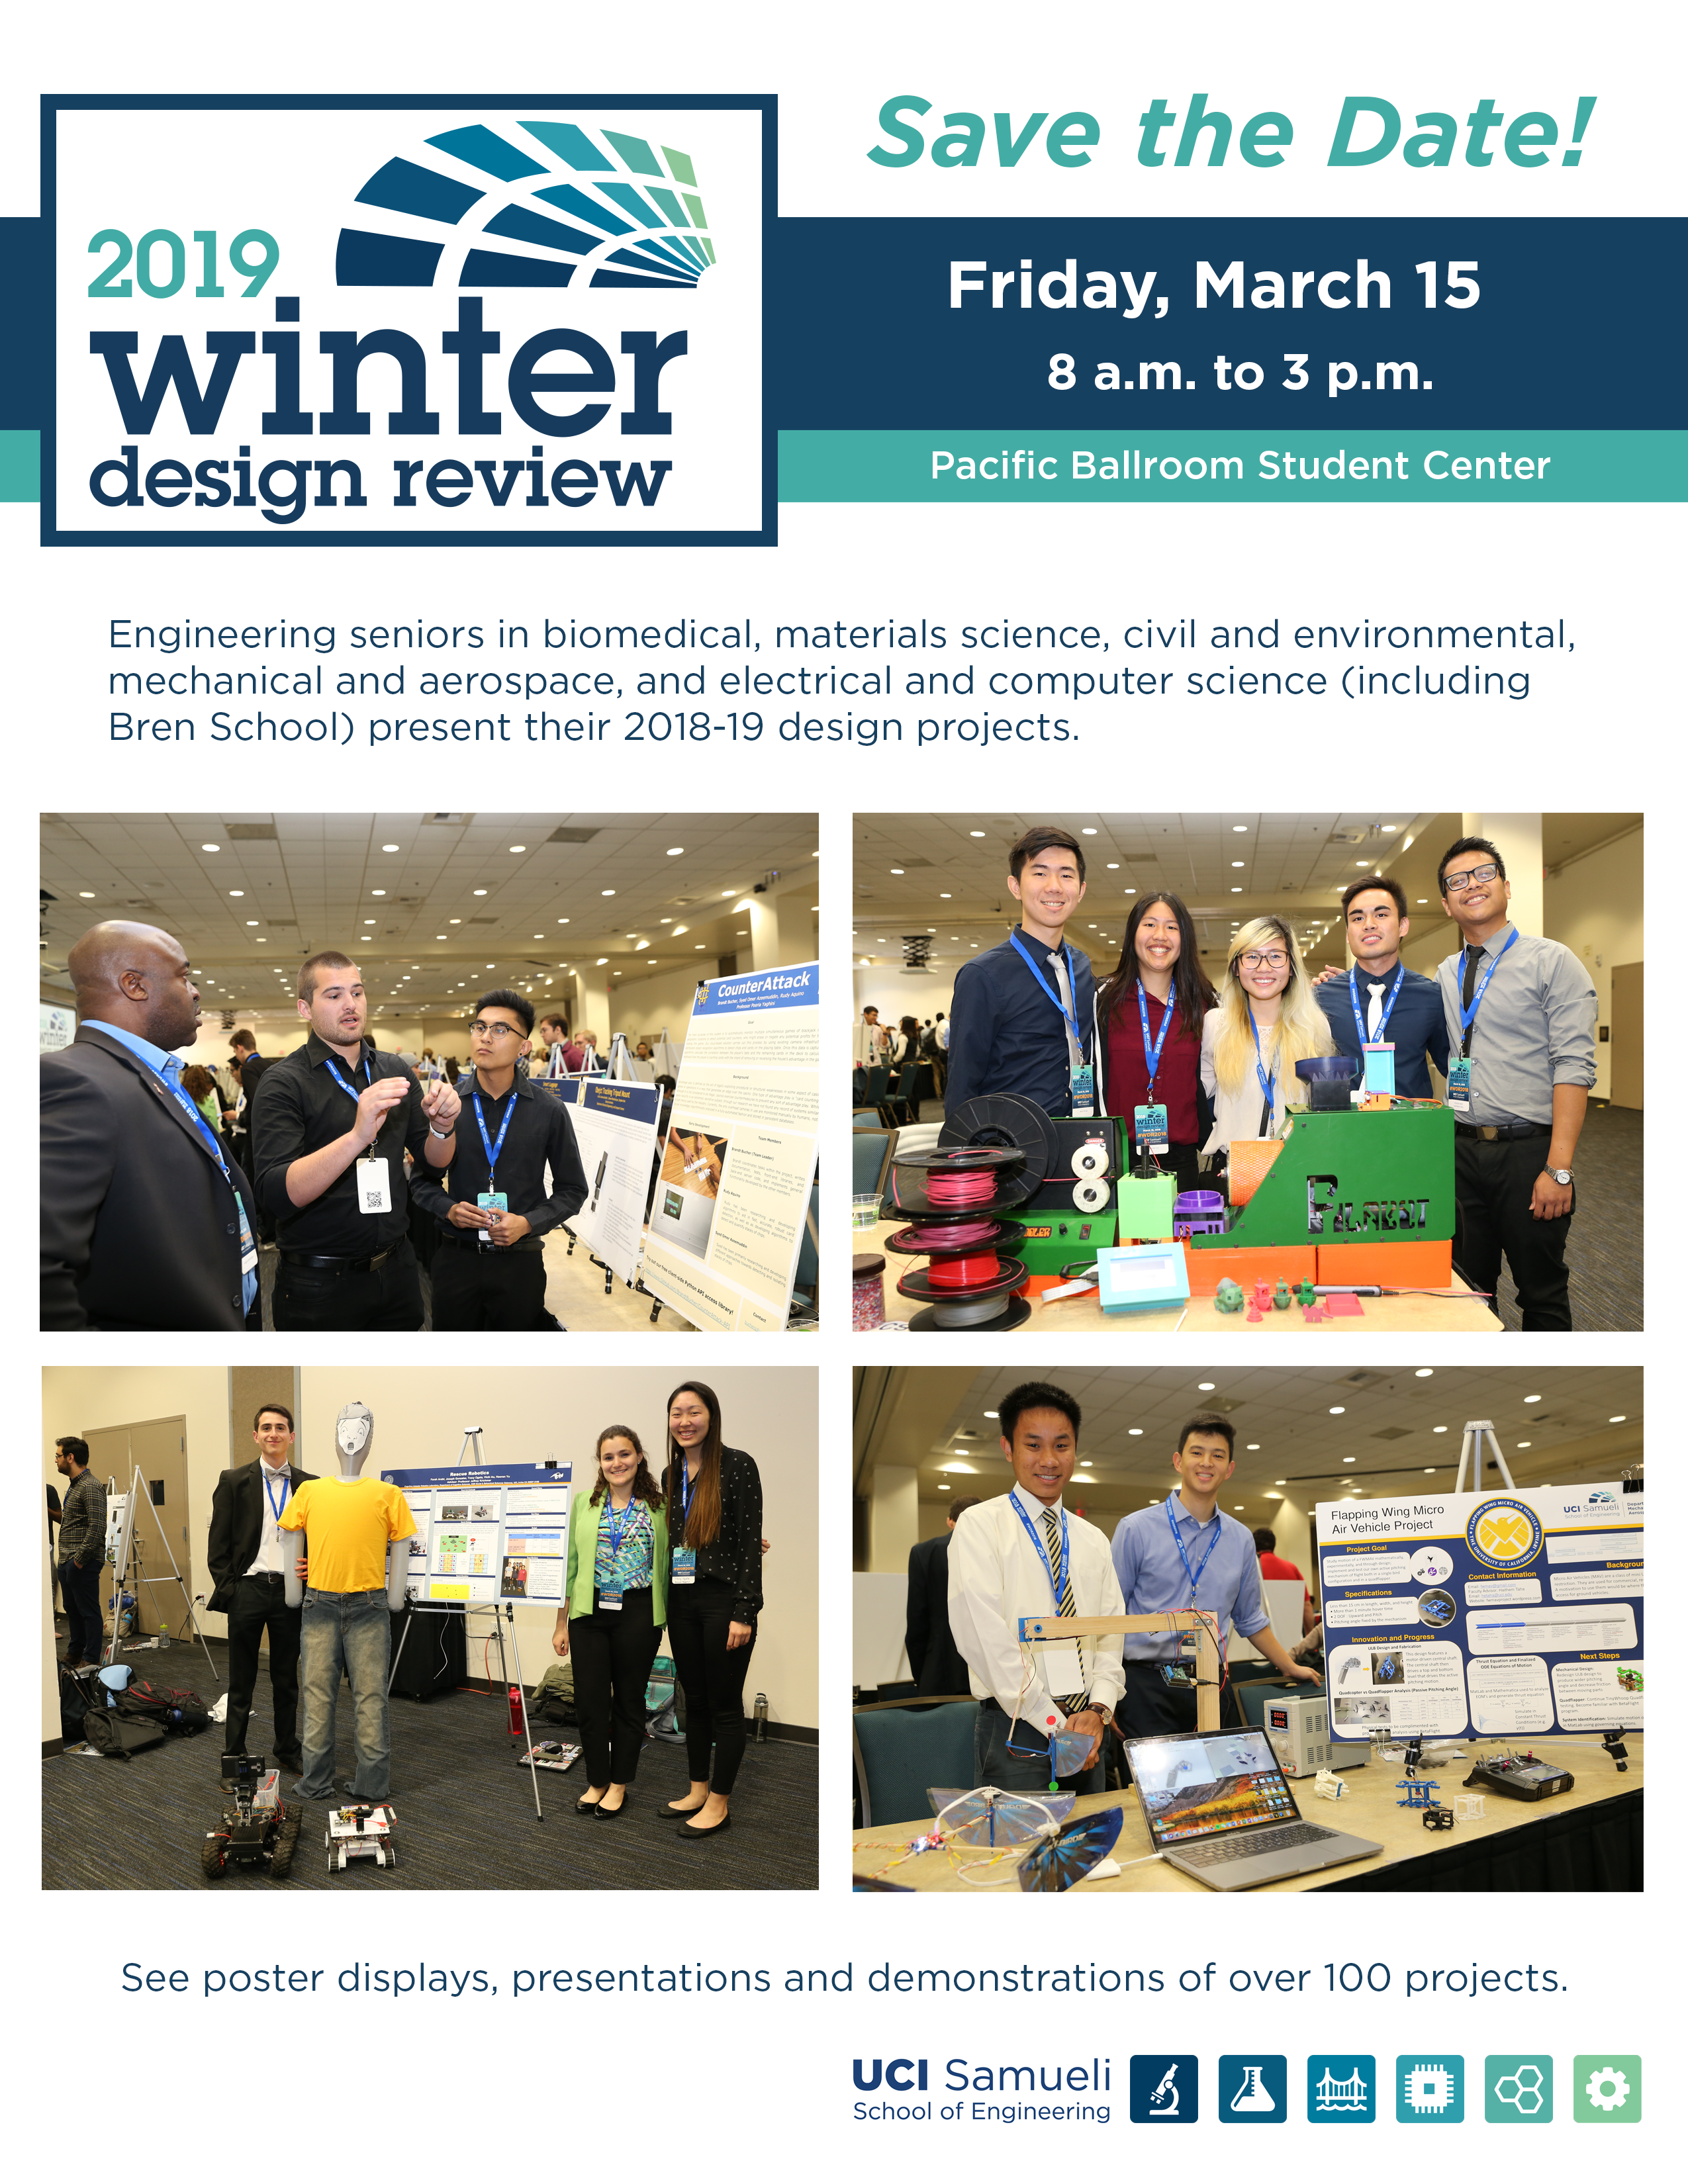 2019 Winter Design Review